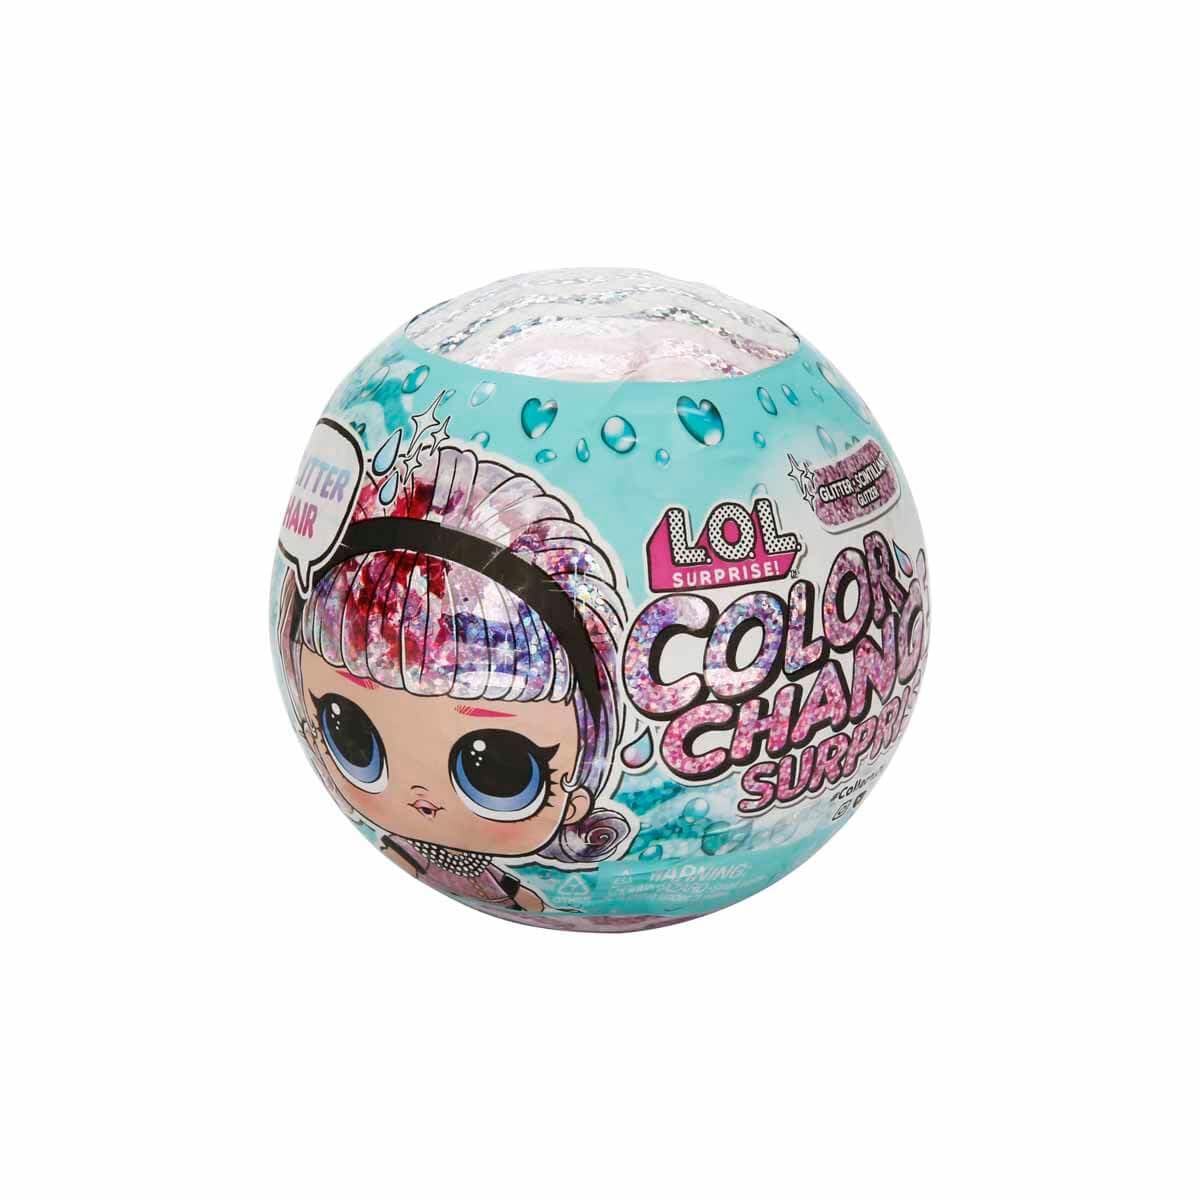 L.O.L. Surprise! Glitter Color Change Doll with 5 Surprises- Collectible Doll Including Sparkly Fashion Accessories, Holiday Toy, Great Gift for Kids Girls Ages 4 5 6+ Years Old